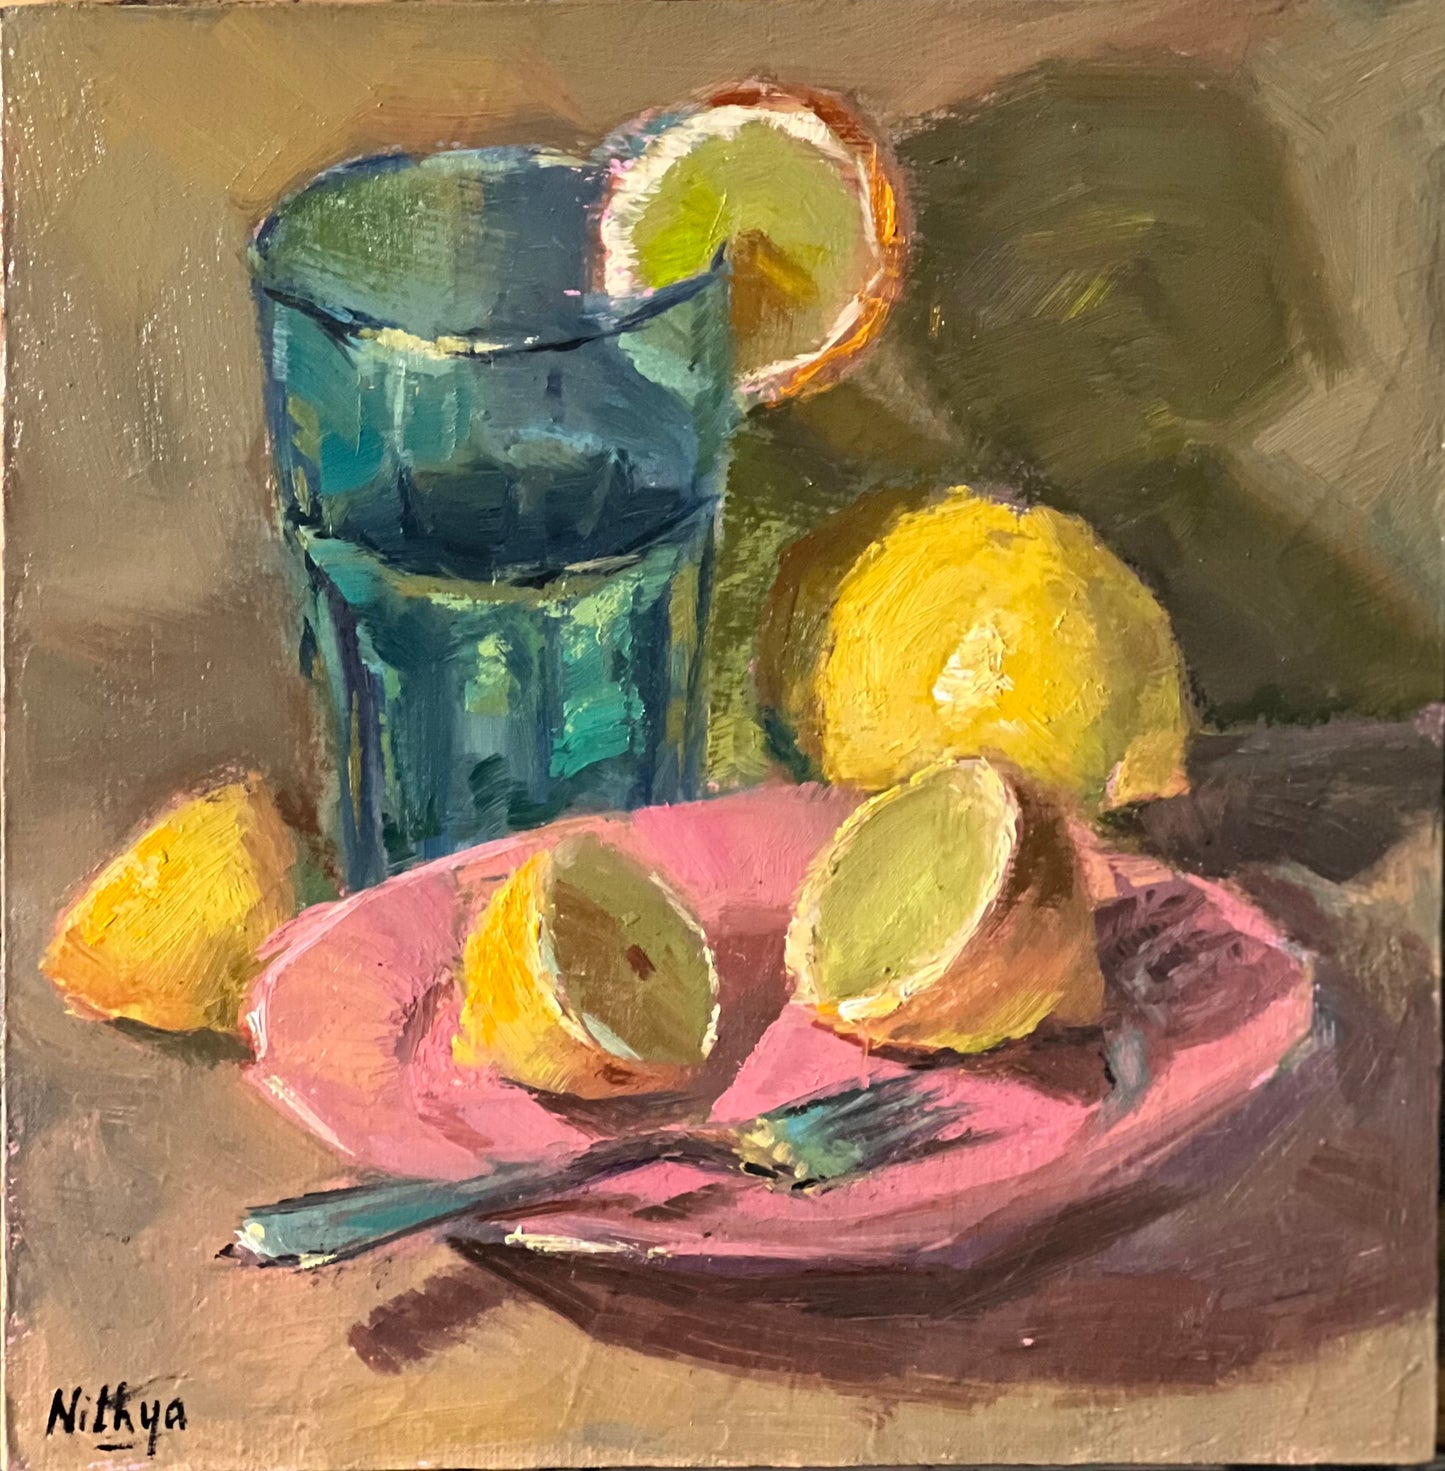 Lemons with a blue glass - Small oil painting, 8 by 8 inches